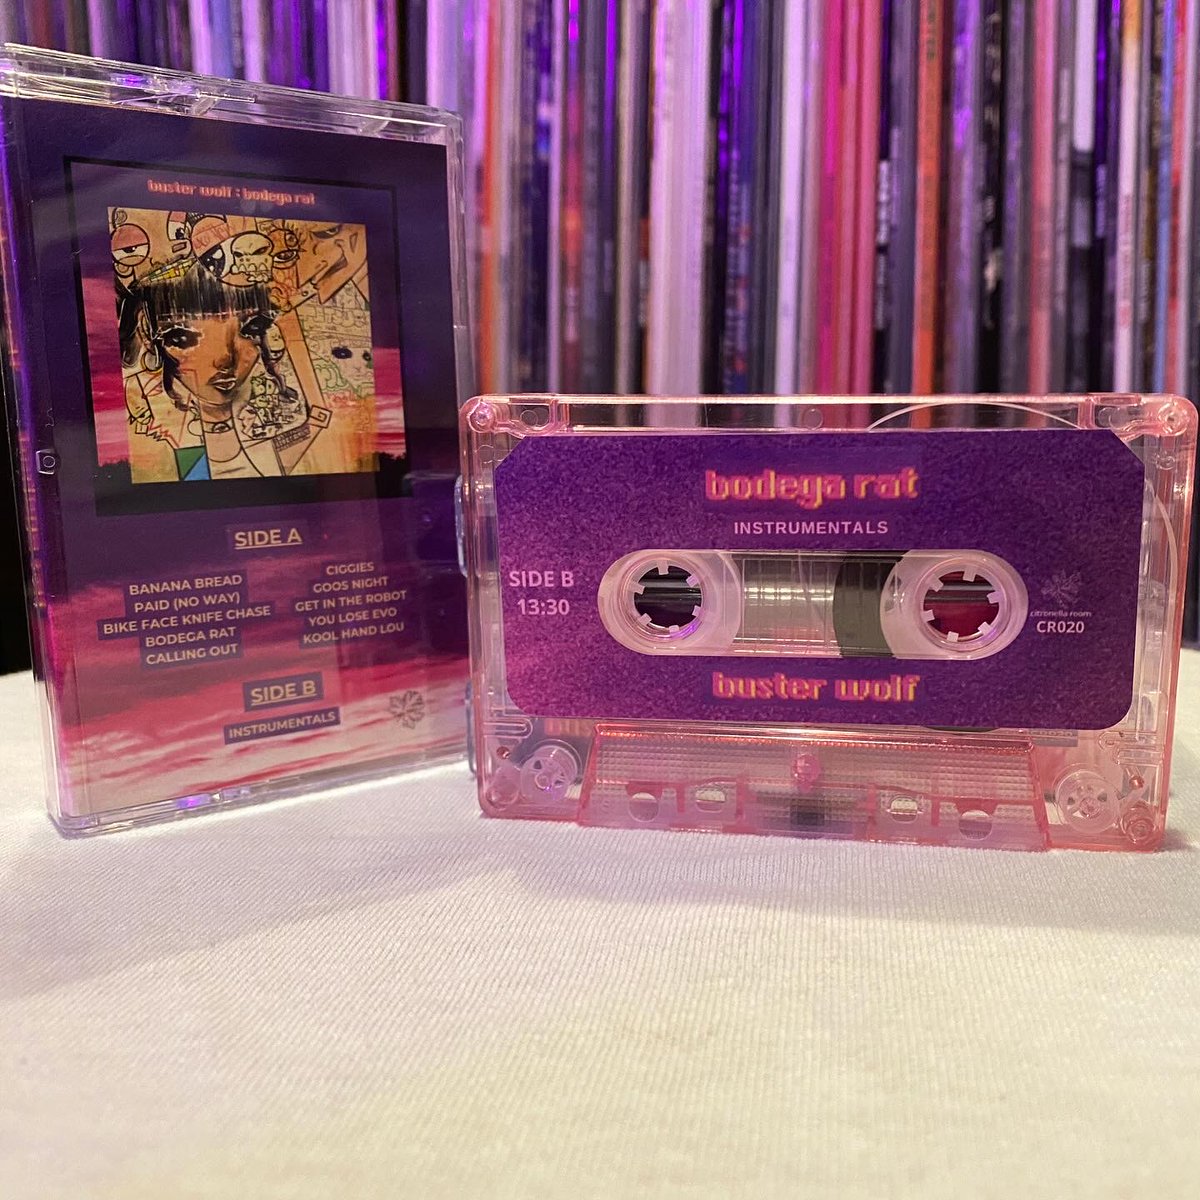 Thanks to those who picked up a copy of Bodega Rat, the latest album from @busterwolfmusic. It's available as a limited edition pink tint cassette, and is streaming everywhere. For fans of underground hip-hop, weed, video games, and anime. bit.ly/43S5wdM